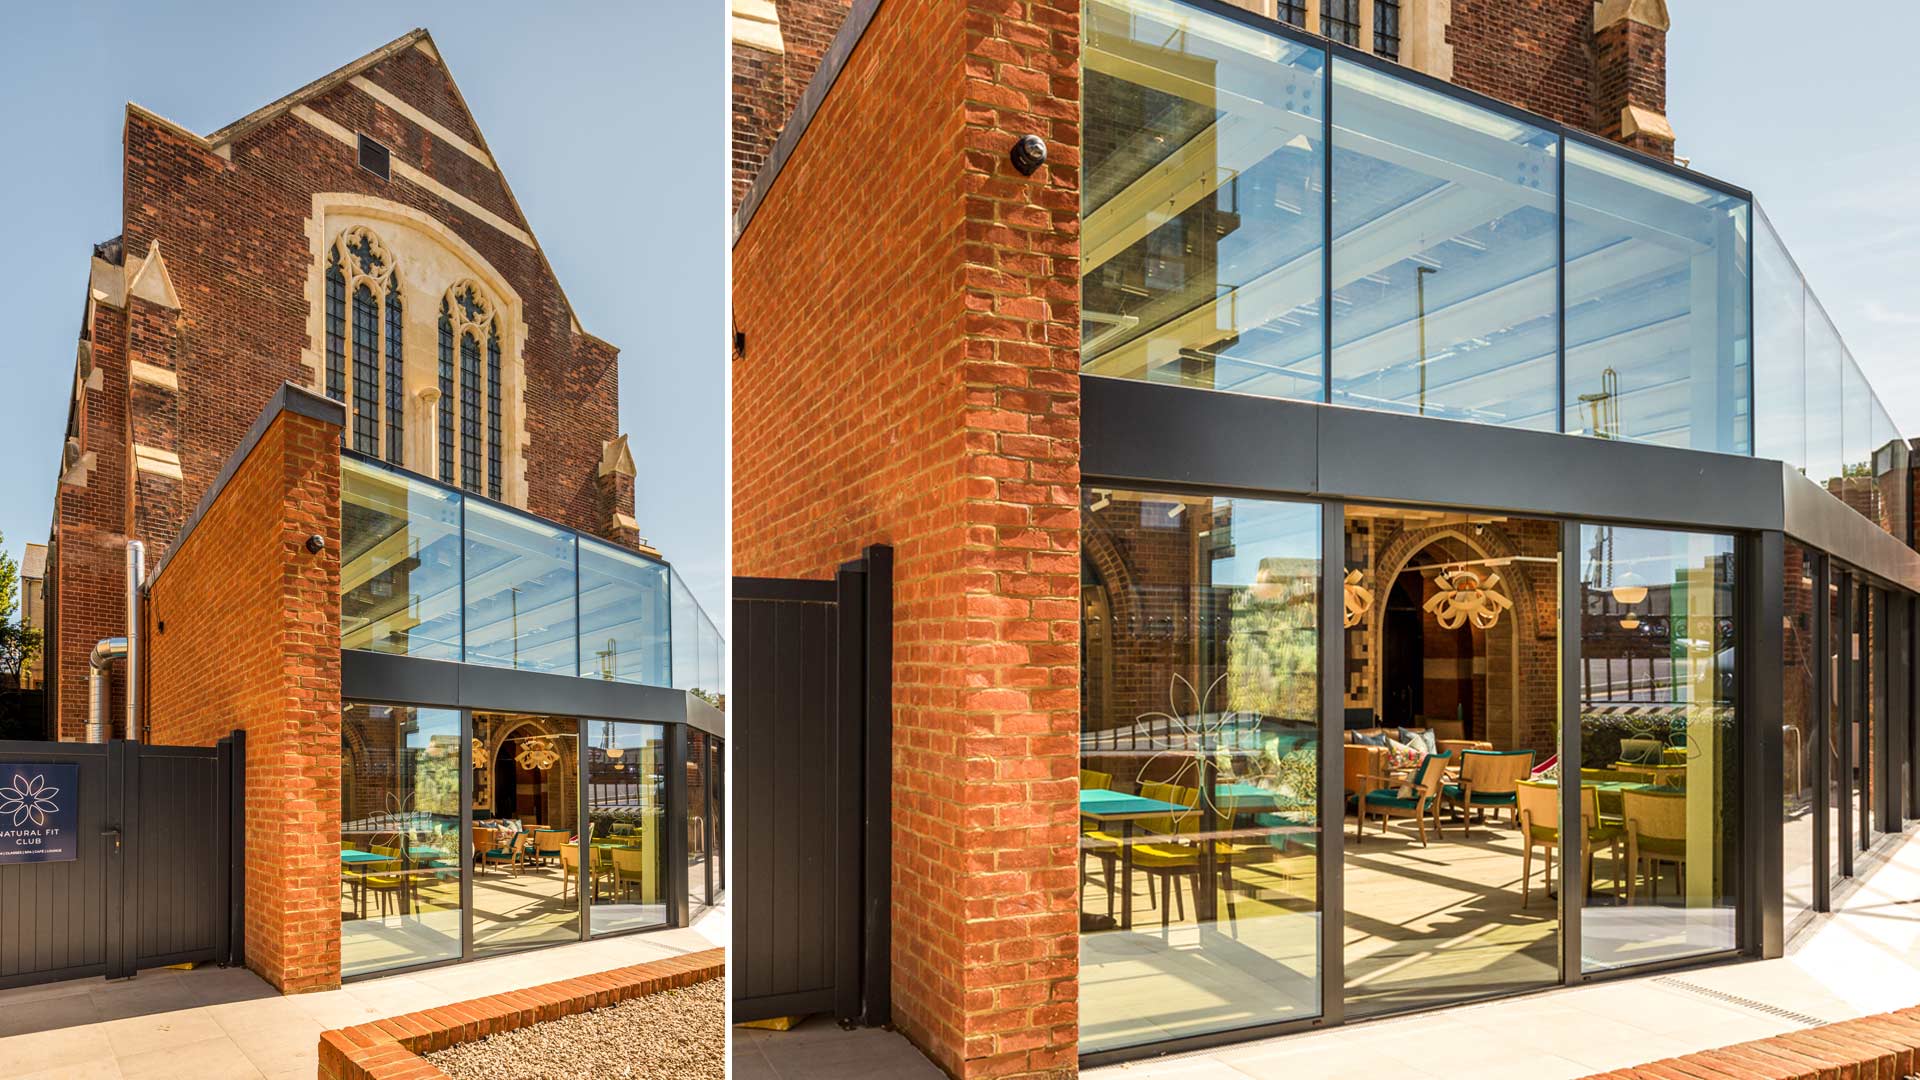 Natural Fit Hove exterior showing original church building with modern brisk and glass extension.